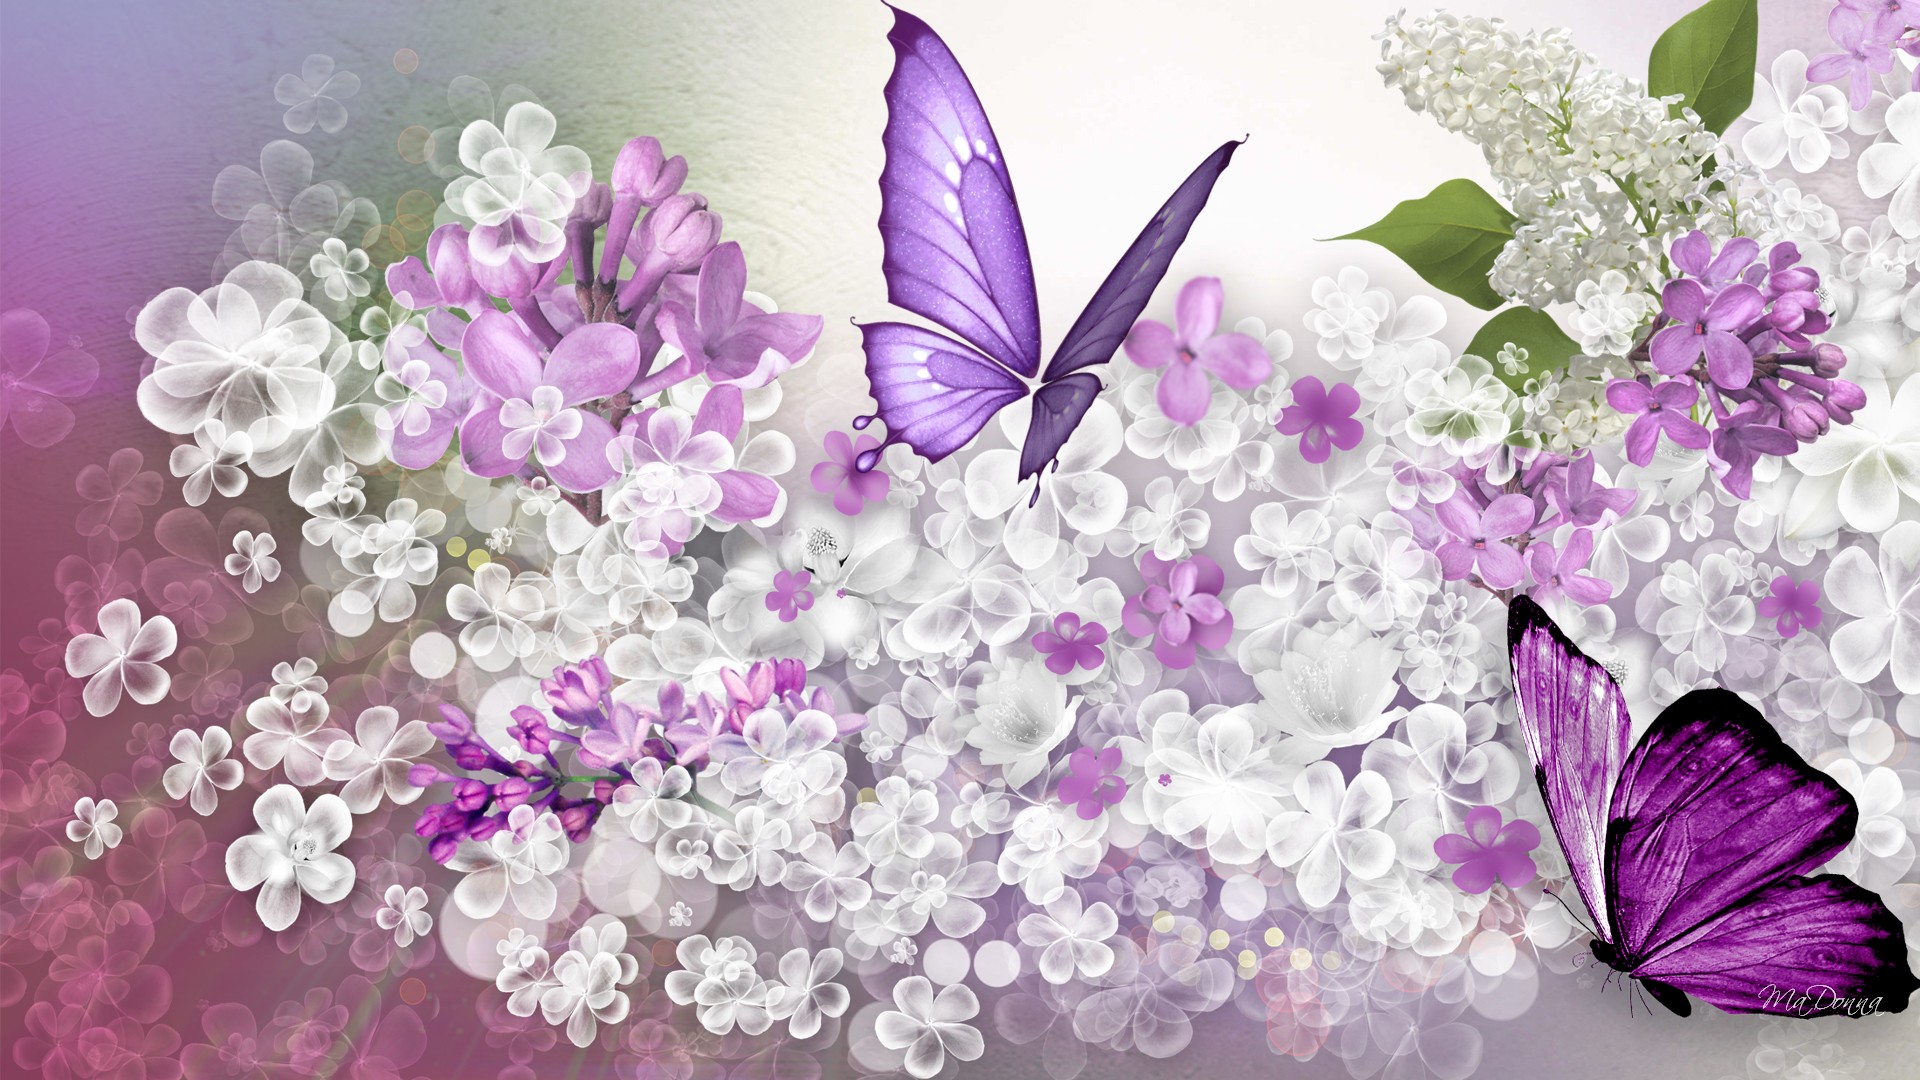 Lilac Flowers Windows Theme and Pictures All for Windows Free